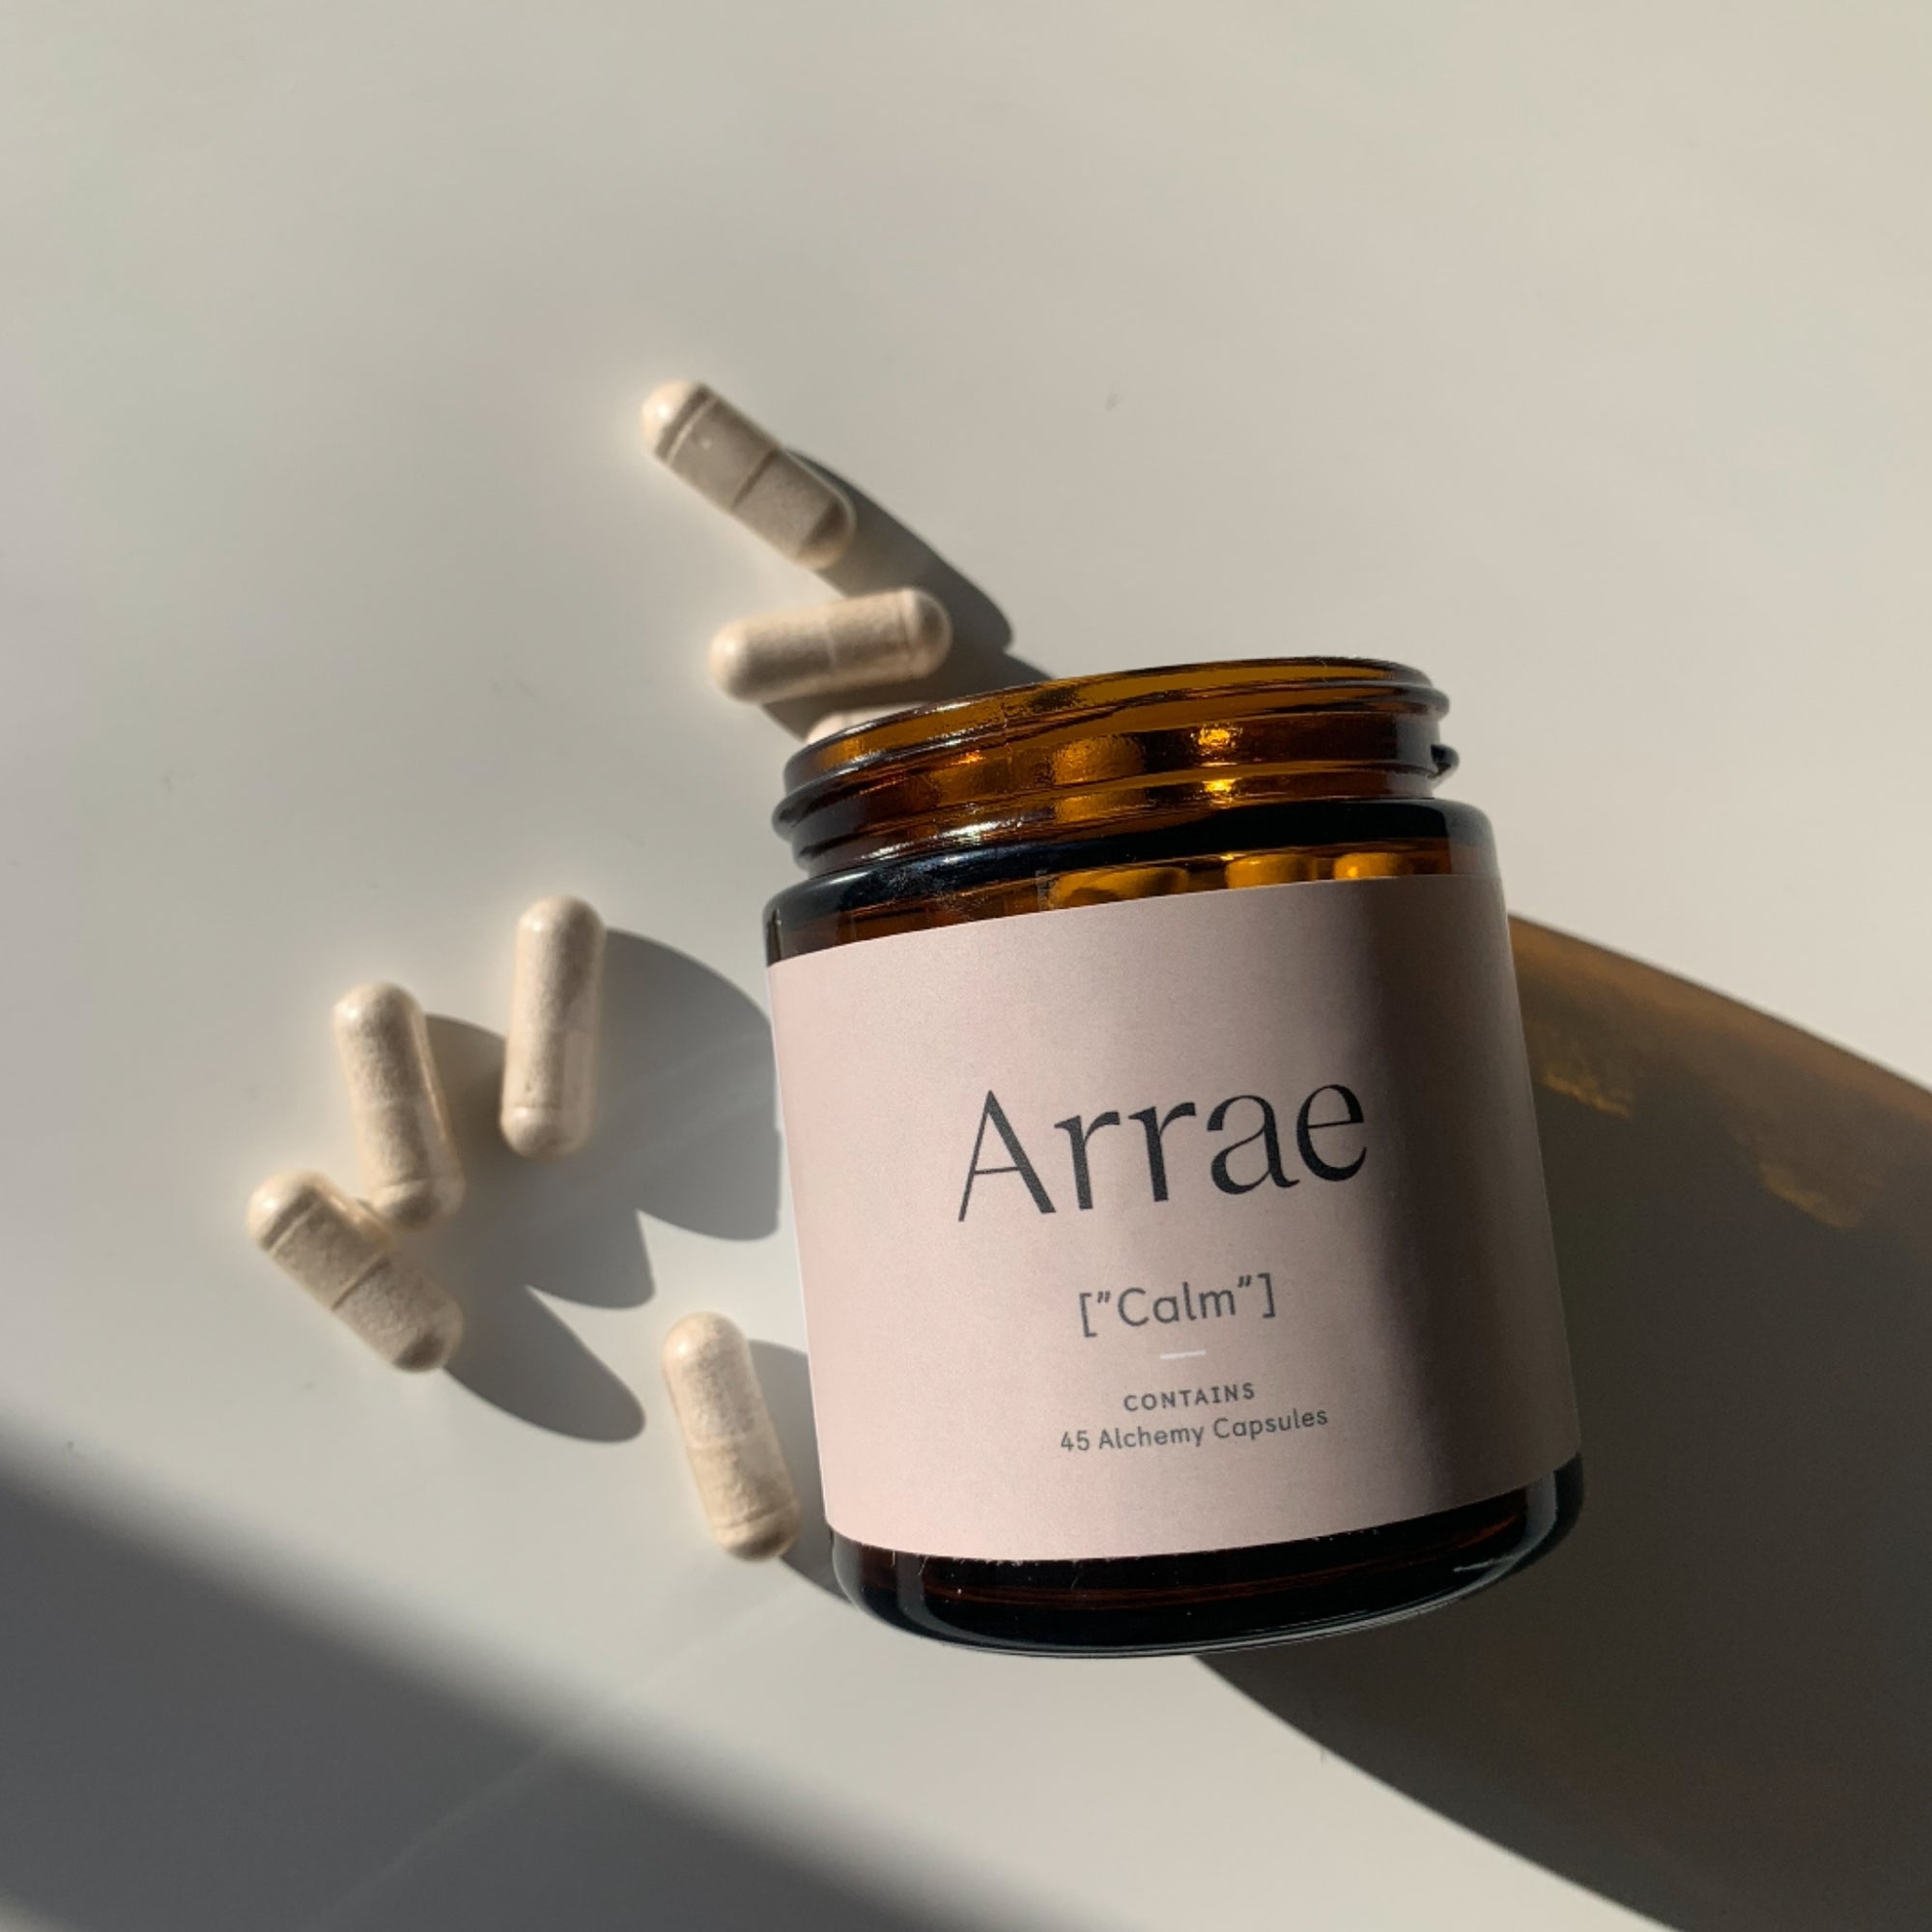 Calm by Arrae: An Effective Natural Anxiolytic